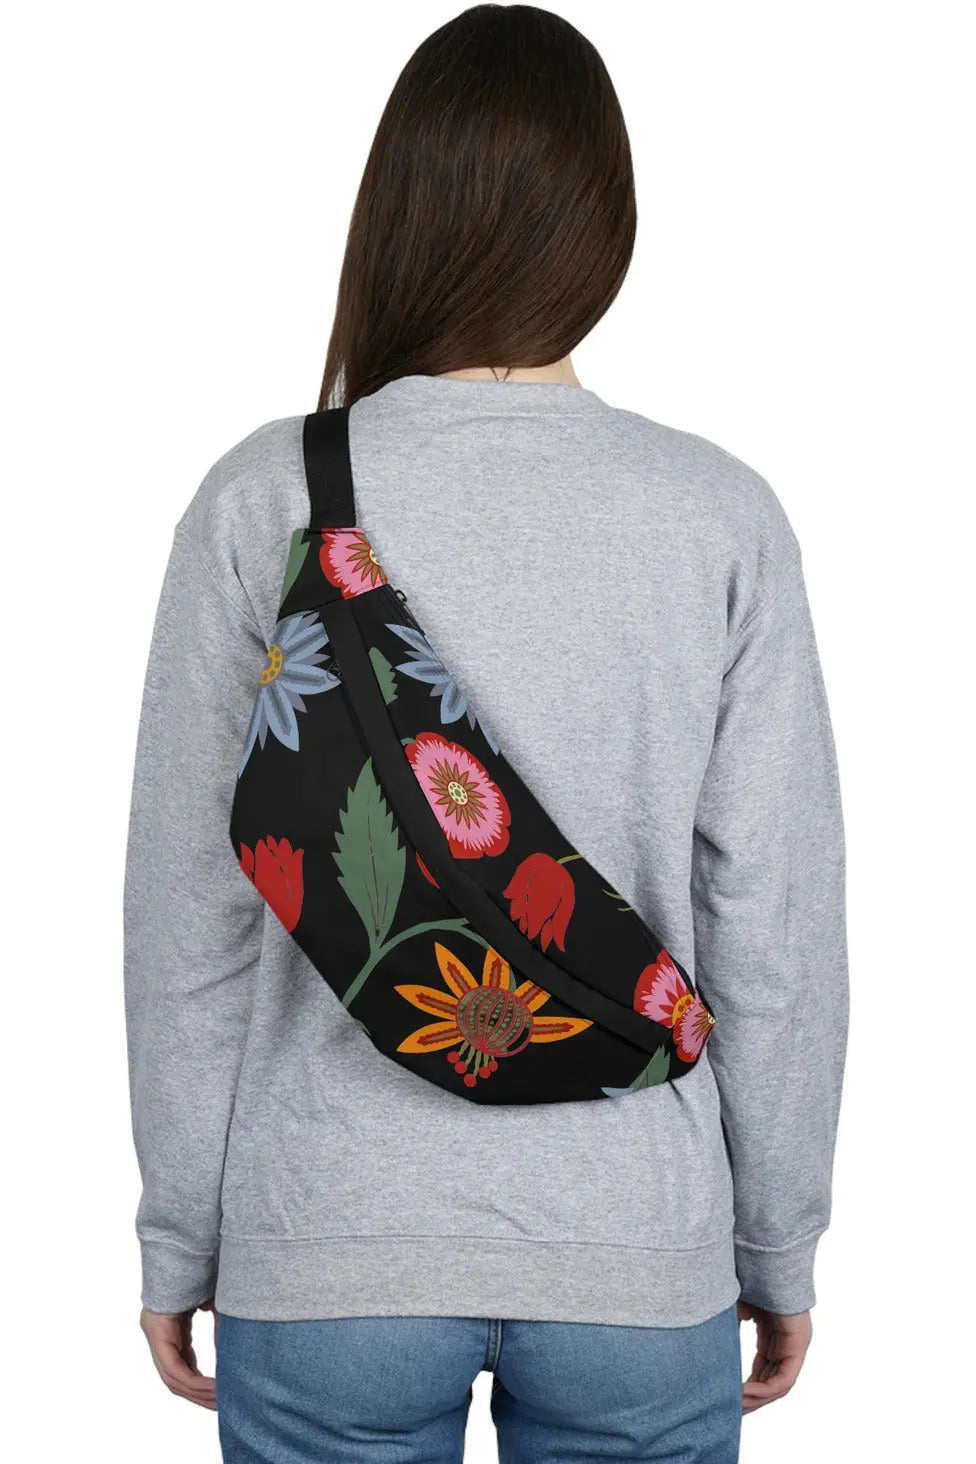  JUST BLOOM (Wild Flowers) Black Women's Large Fanny Pack Bags